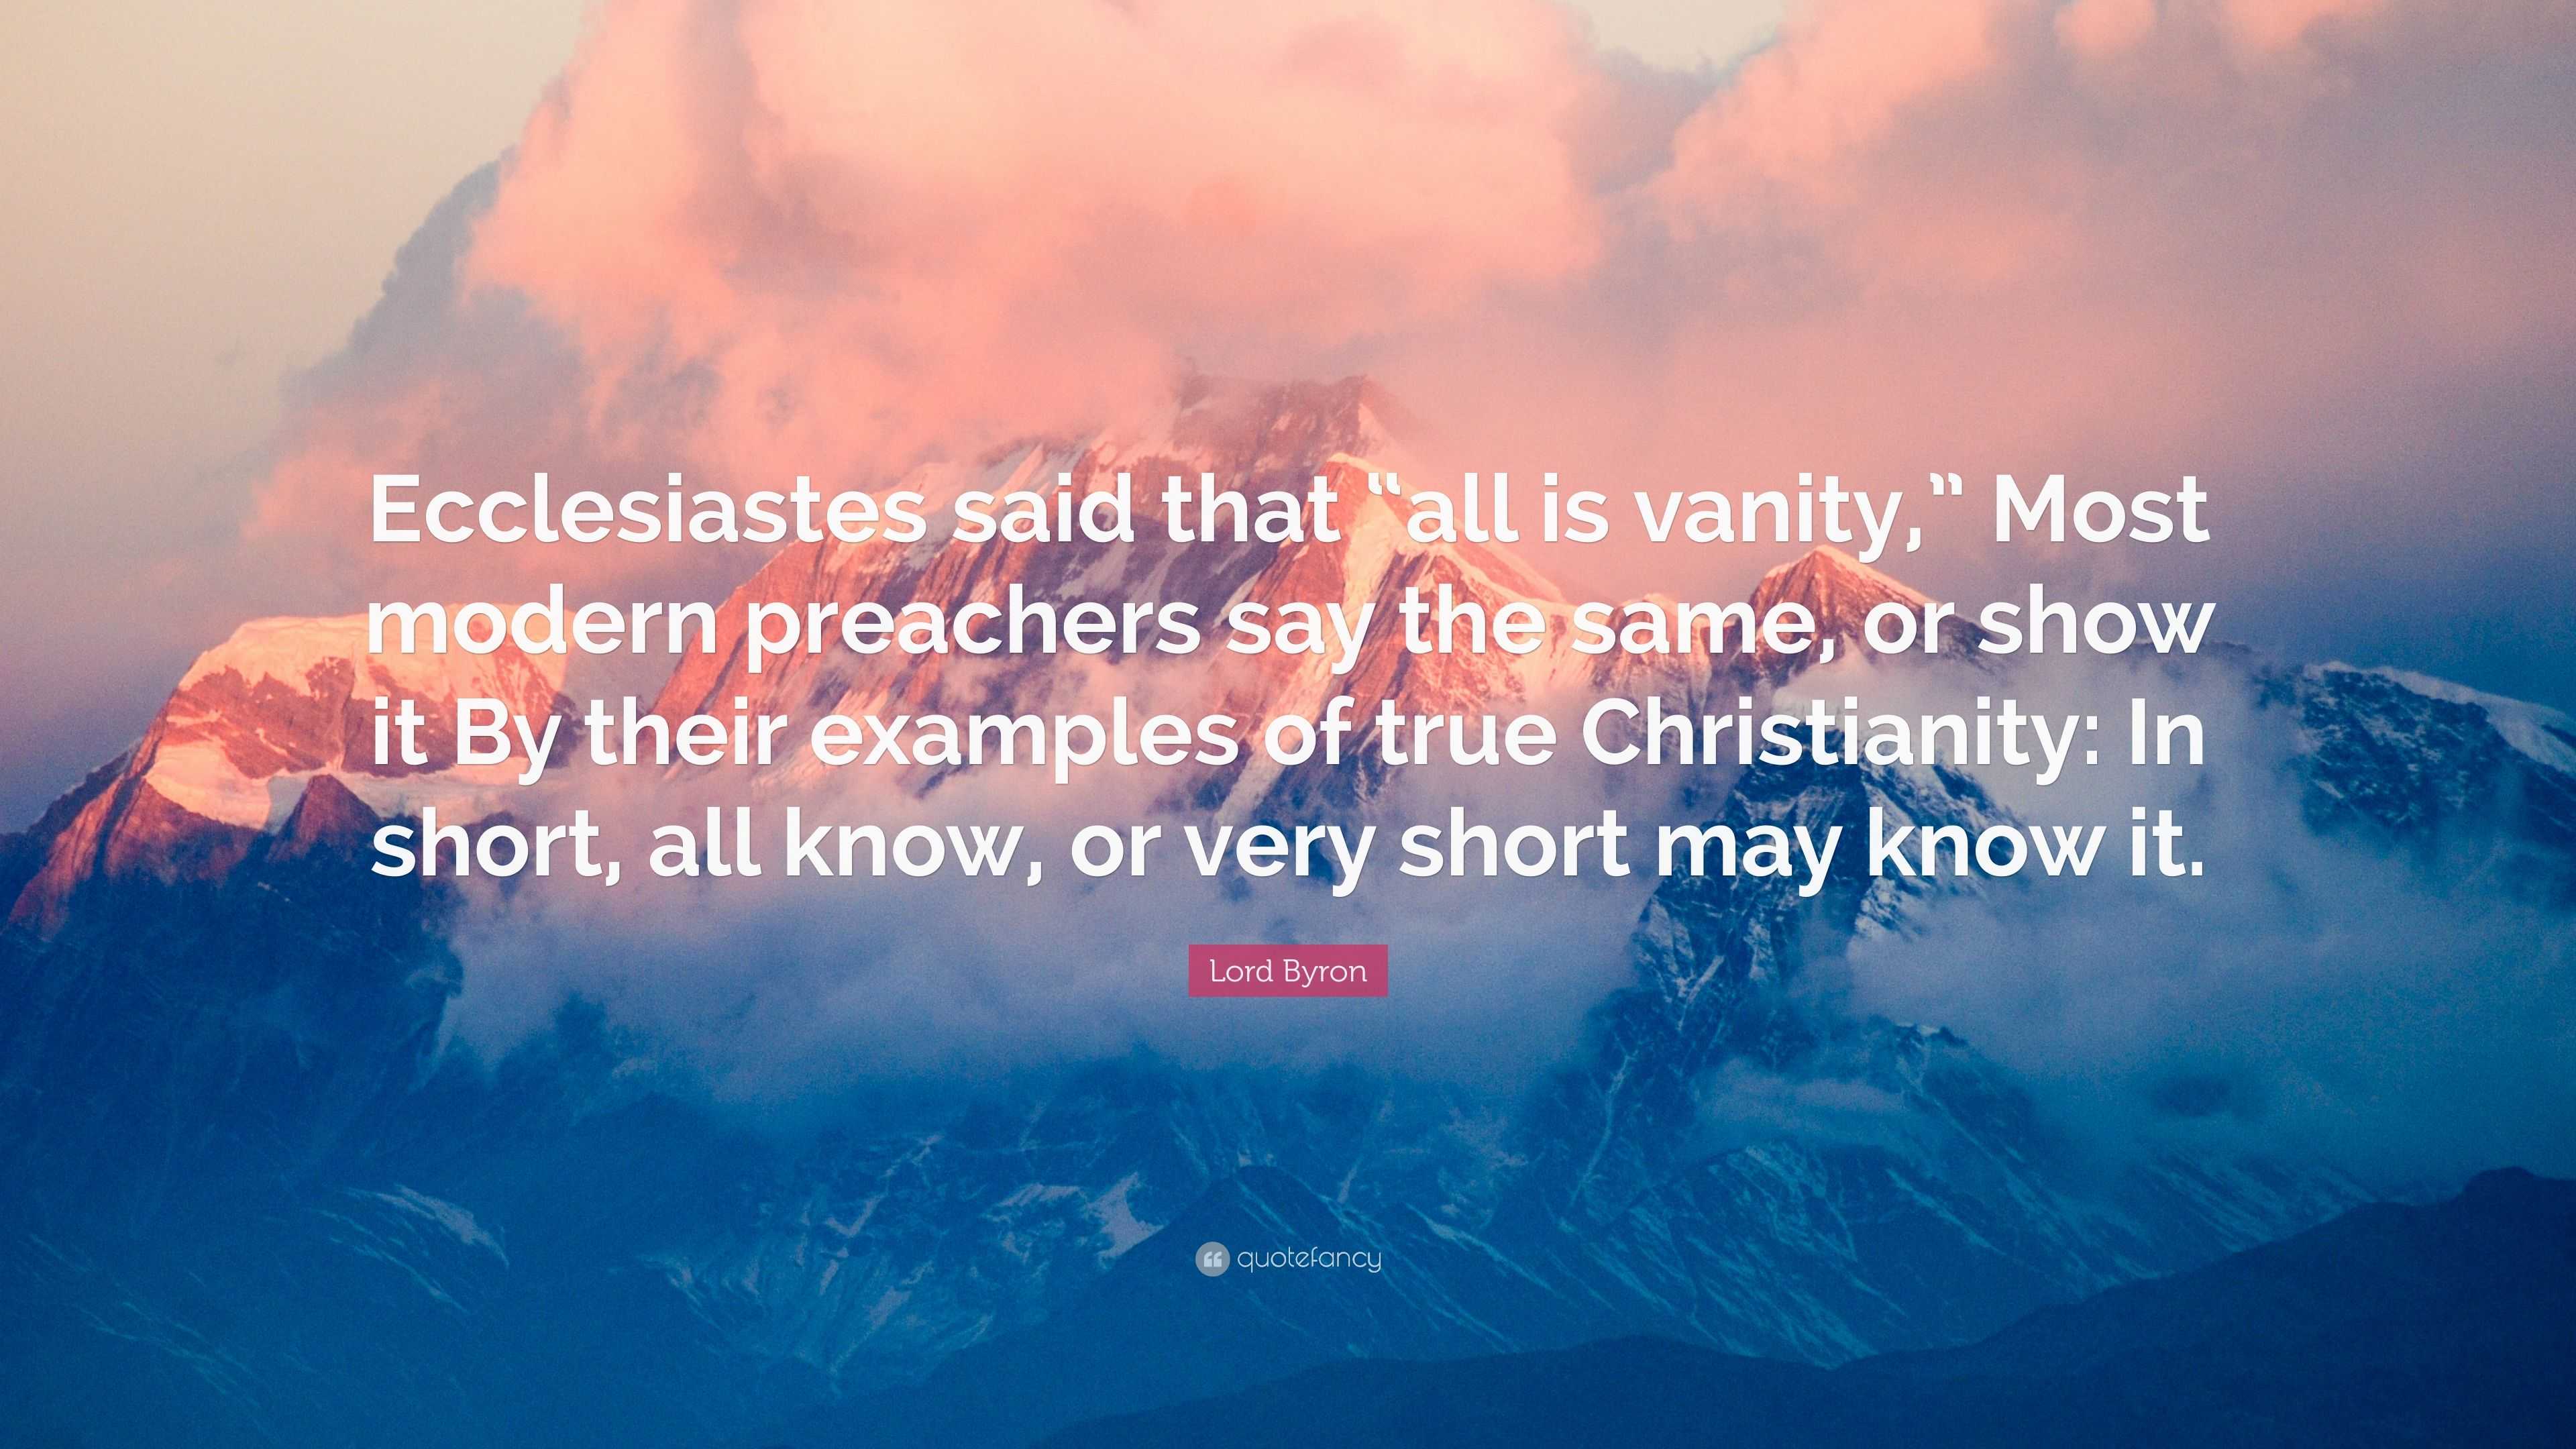 All Is Vanity!” How to Understand Ecclesiastes' Famous Lament